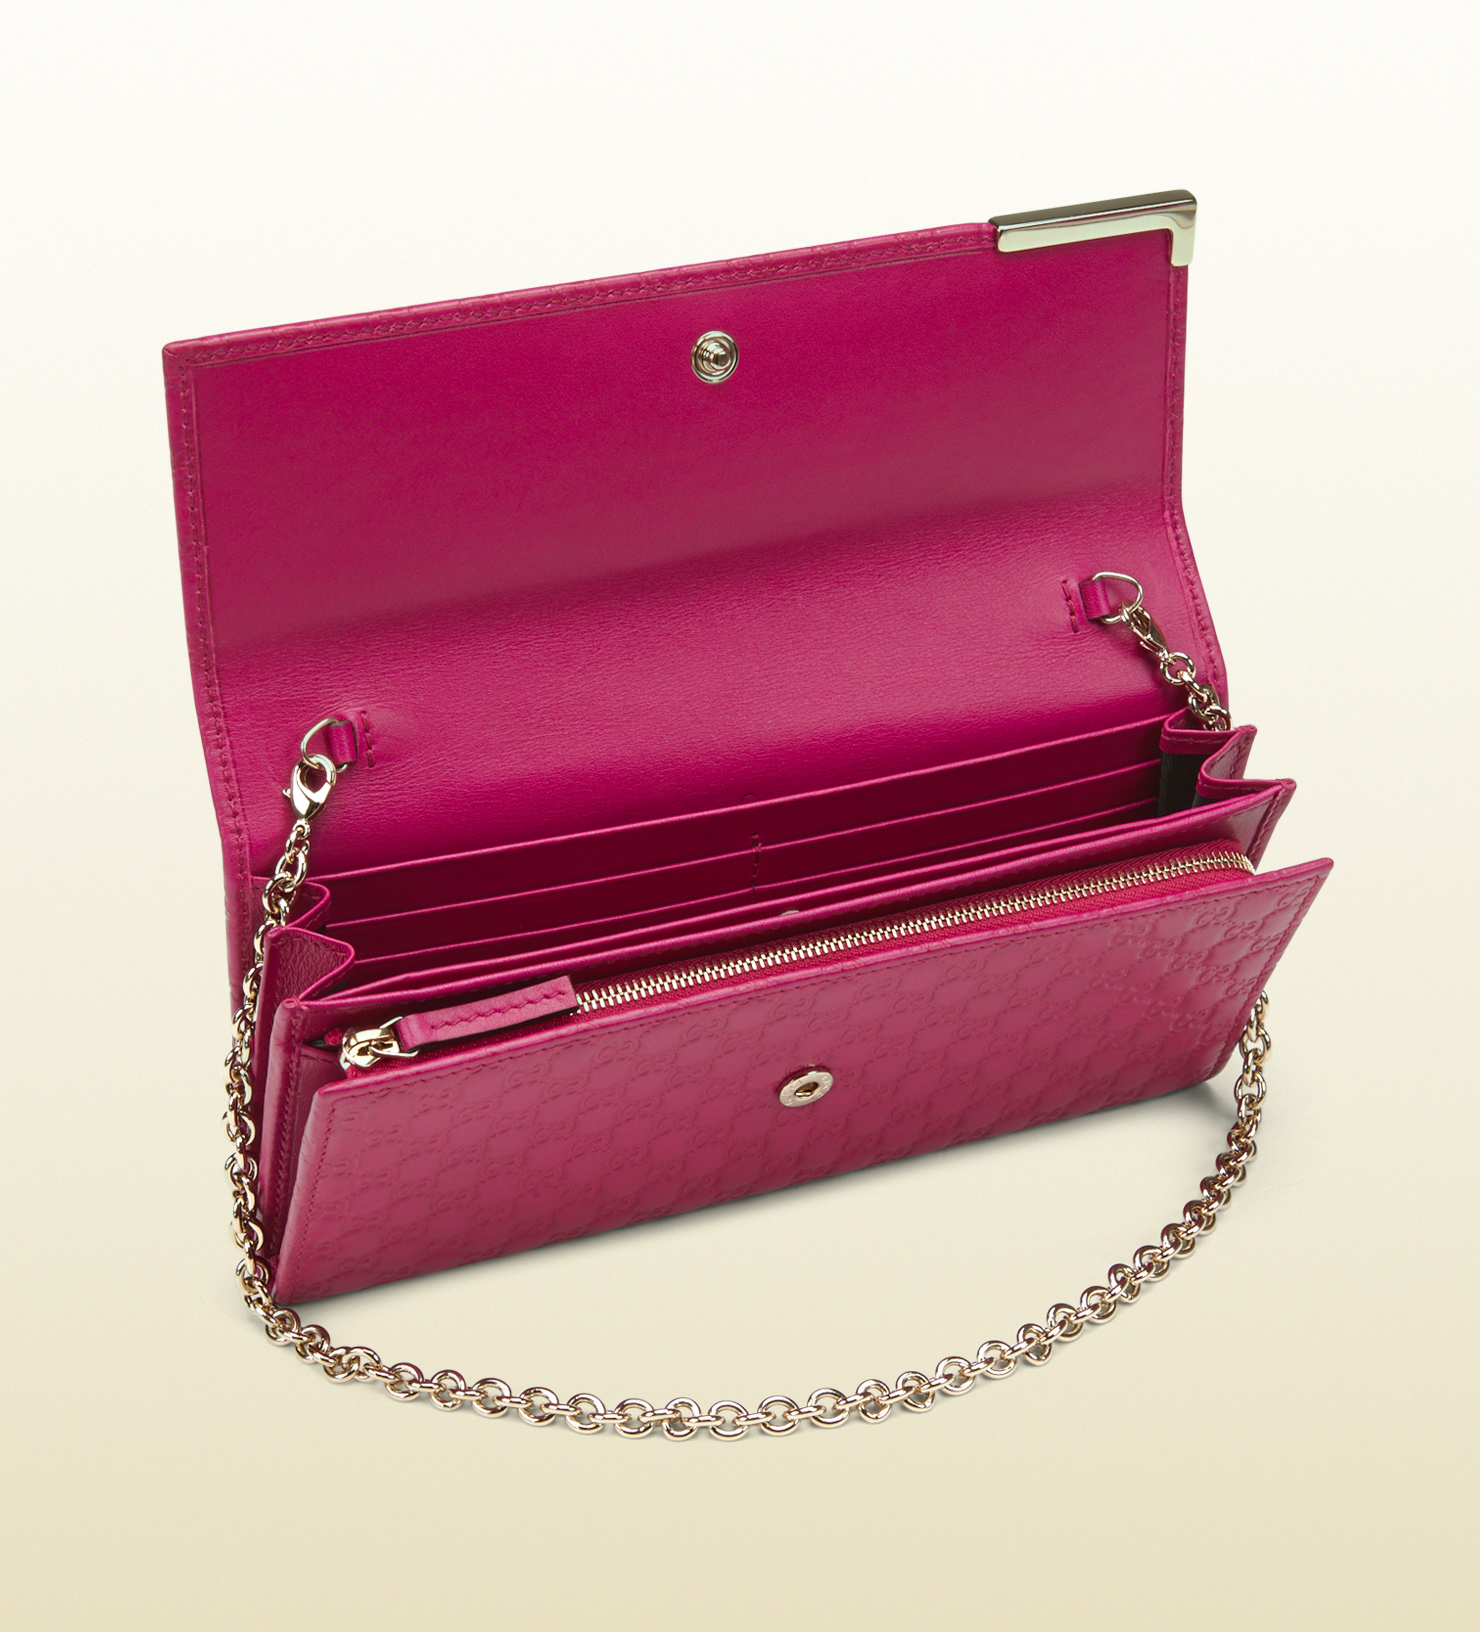 Gucci Microssima Leather Chain Wallet in Fuchsia (Pink) - Lyst